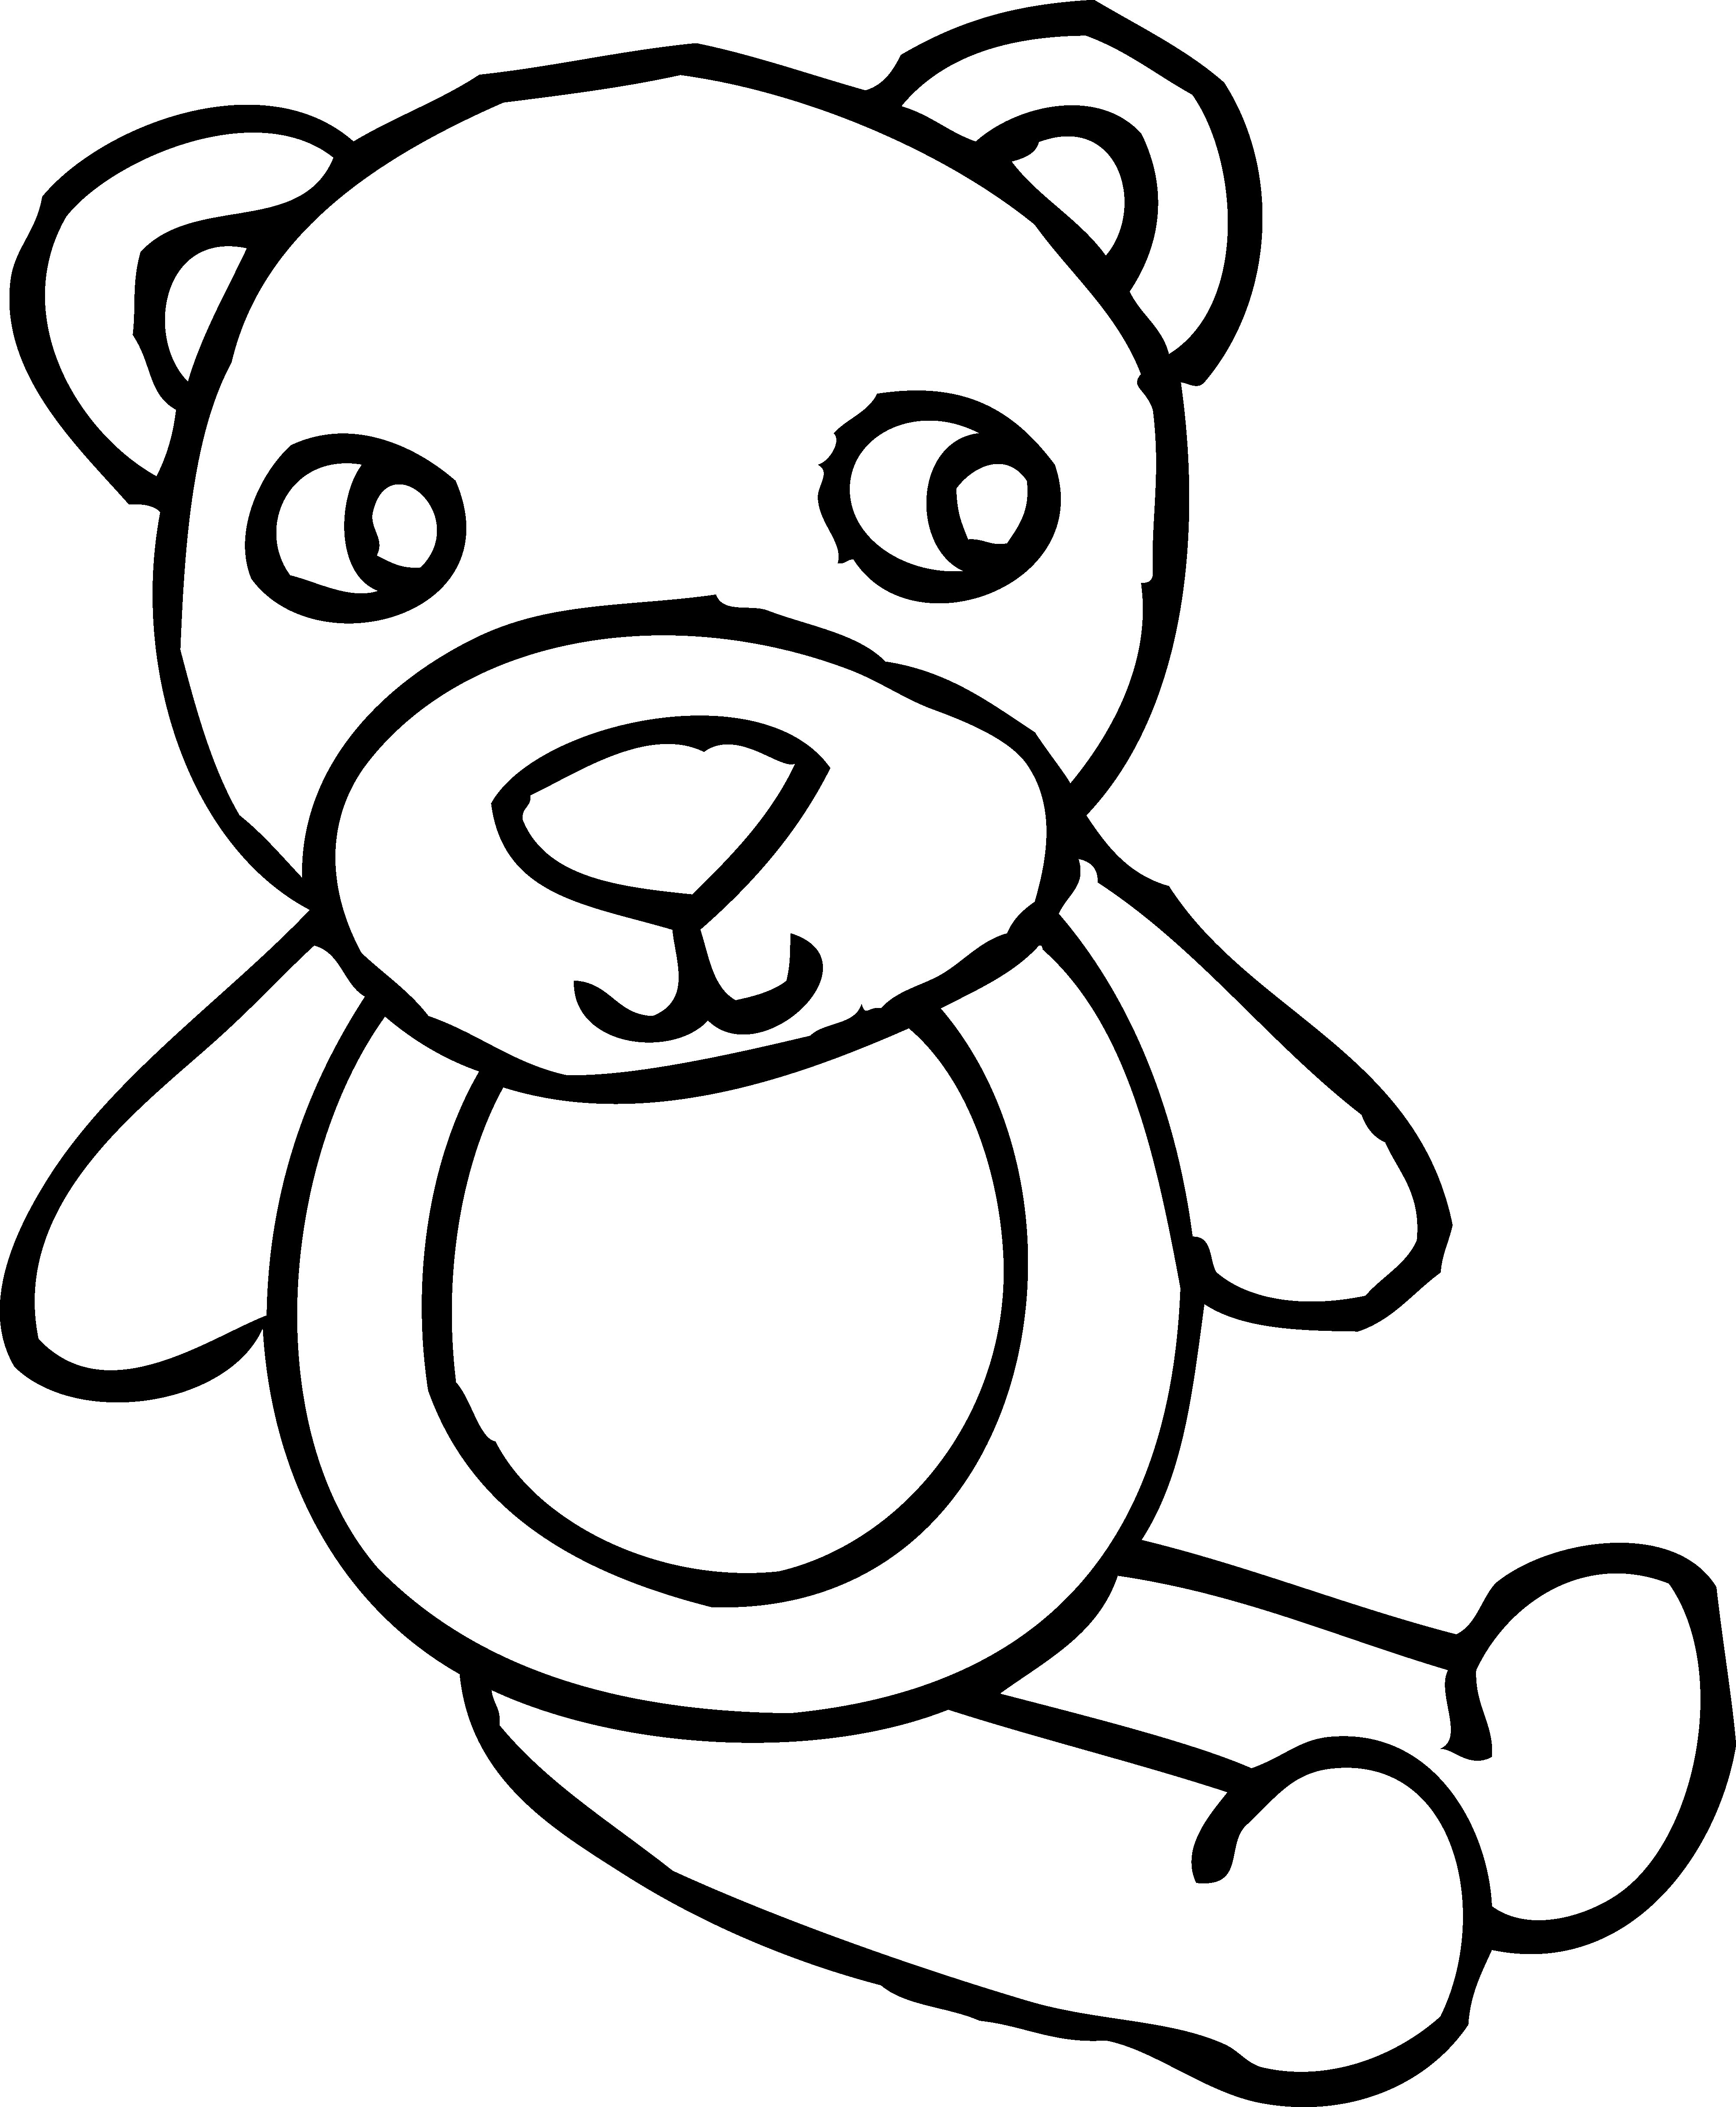 Teddy Bear Clipart Black And White - Cliparts.co